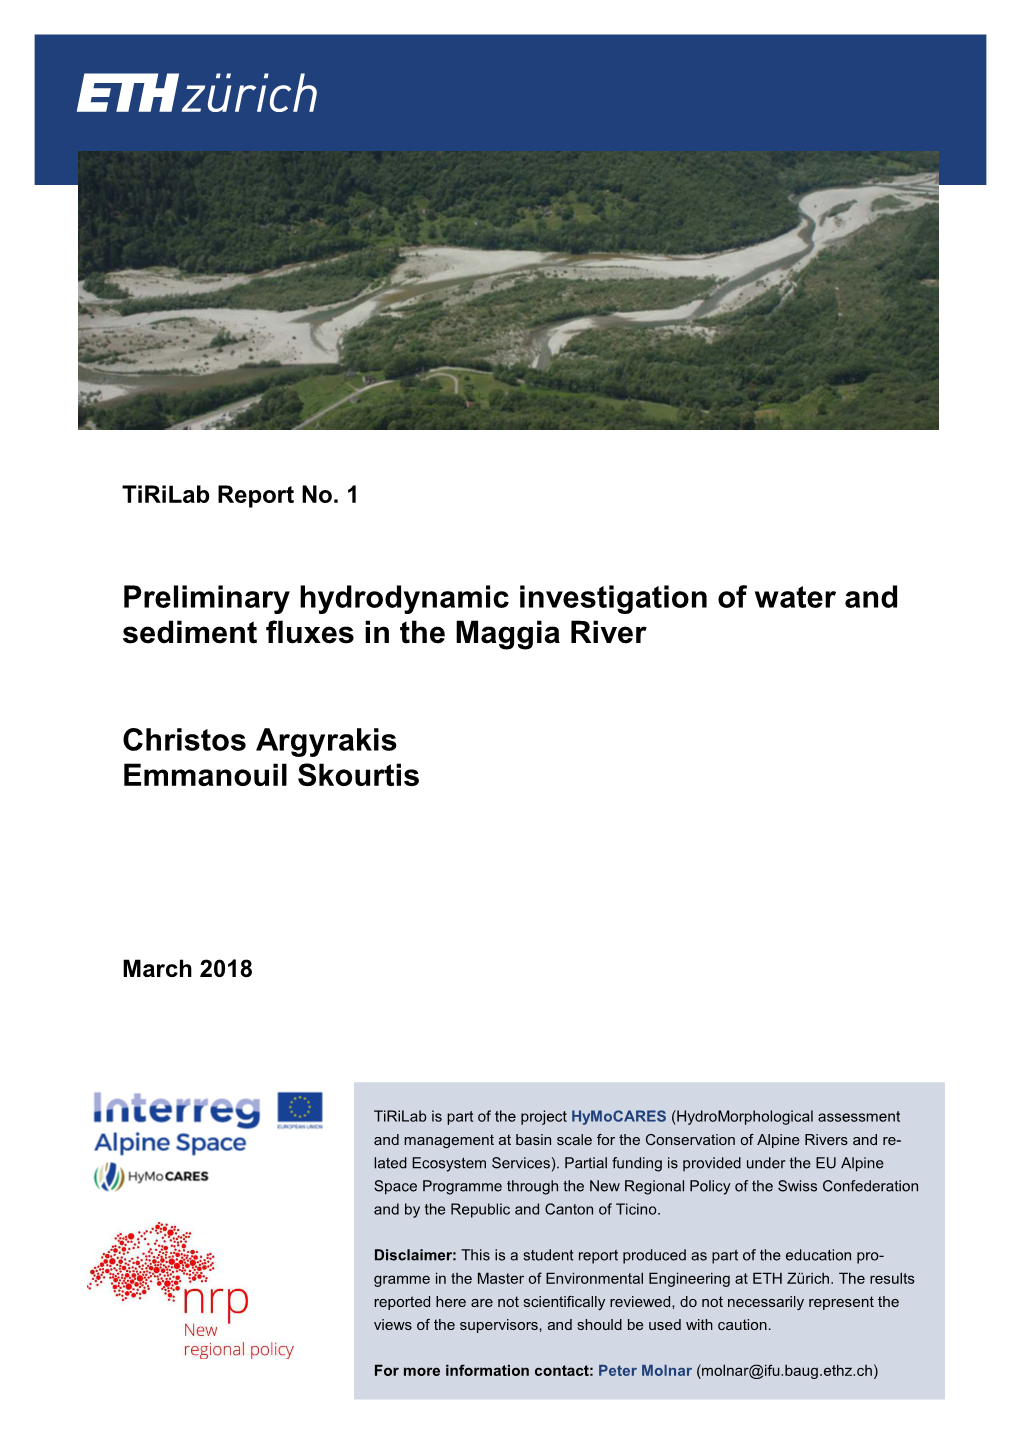 Preliminary Hydrodynamic Investigation of Water and Sediment Fluxes in the Maggia River